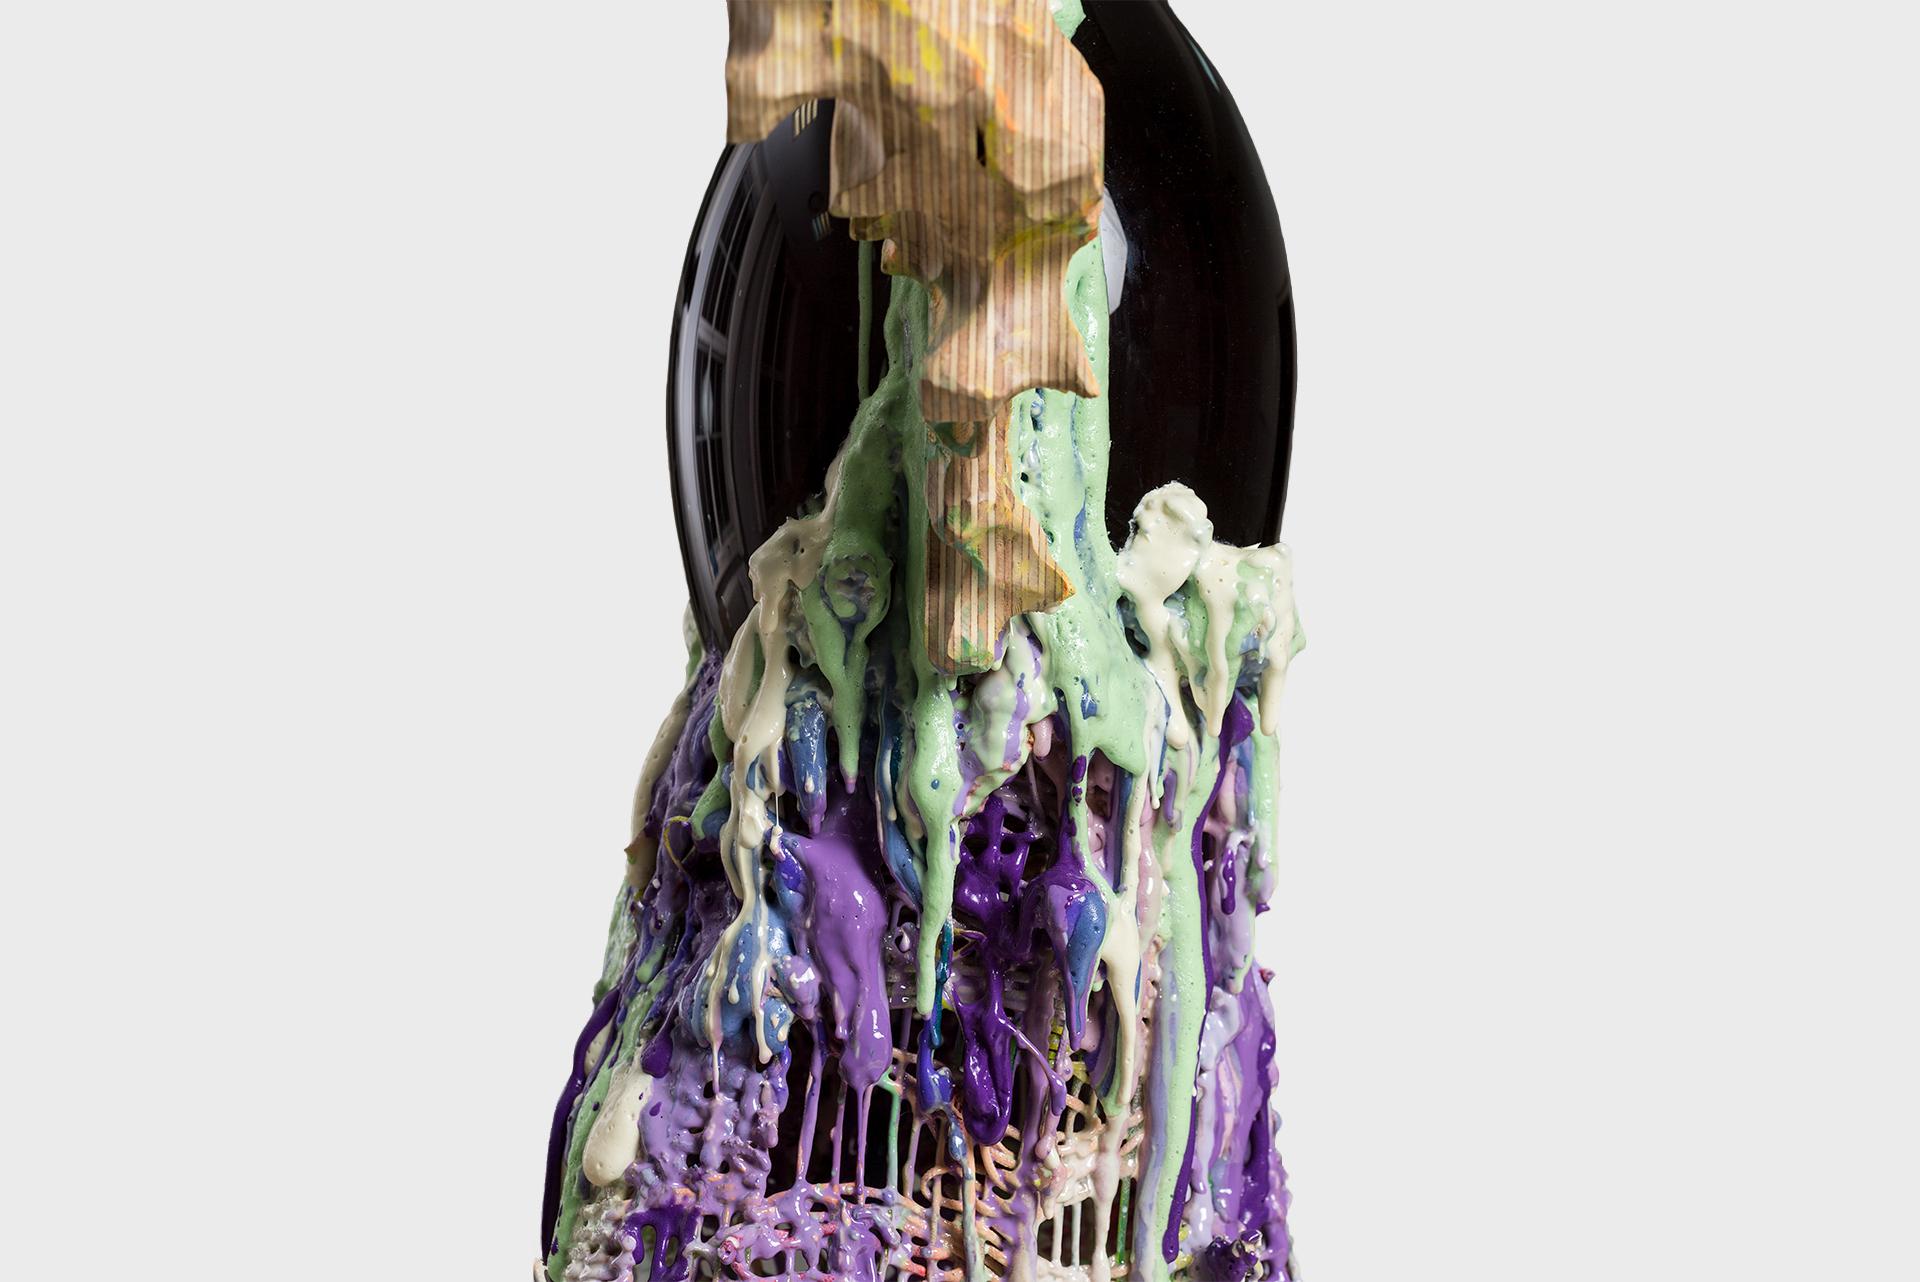 Contemporary Glass Vase by Tadeas Podracky from the Series “The Metamorphosis” For Sale 2